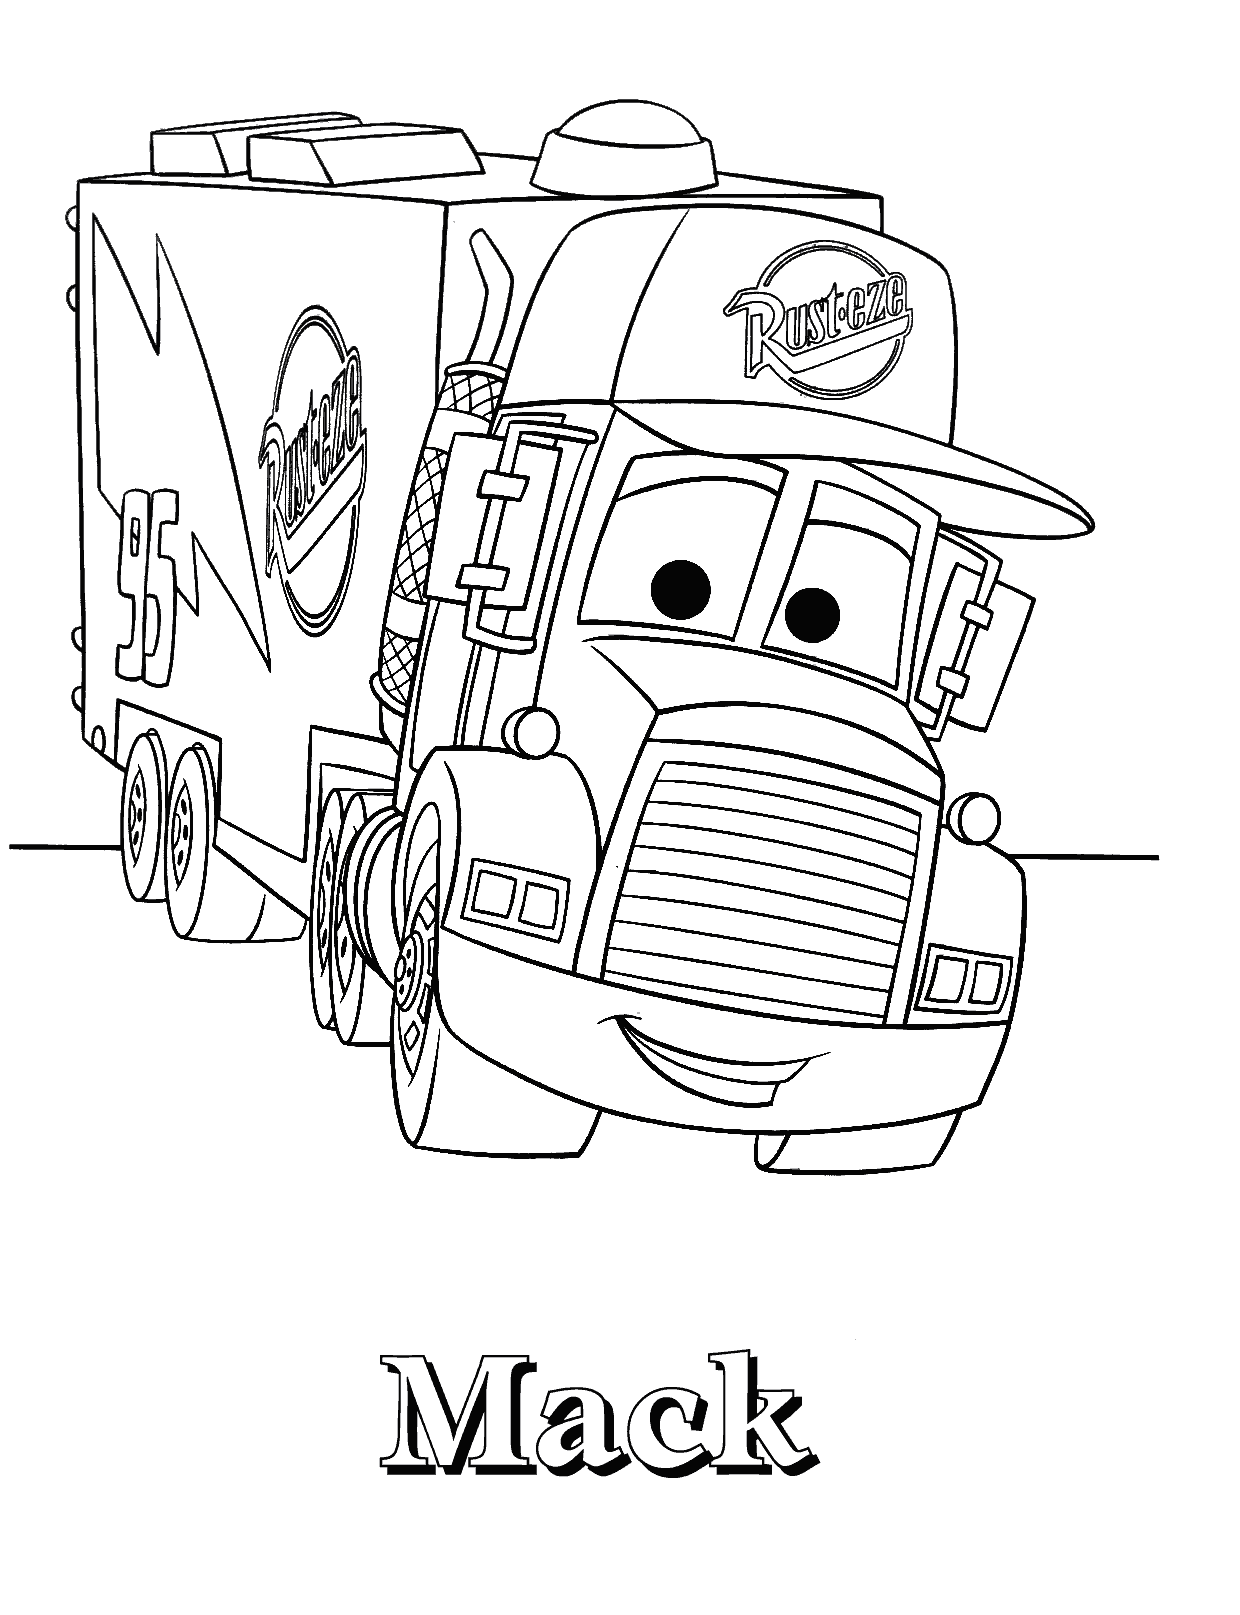 disney-cars-coloring-pages-macklightning-mcqueen-mack-truck 